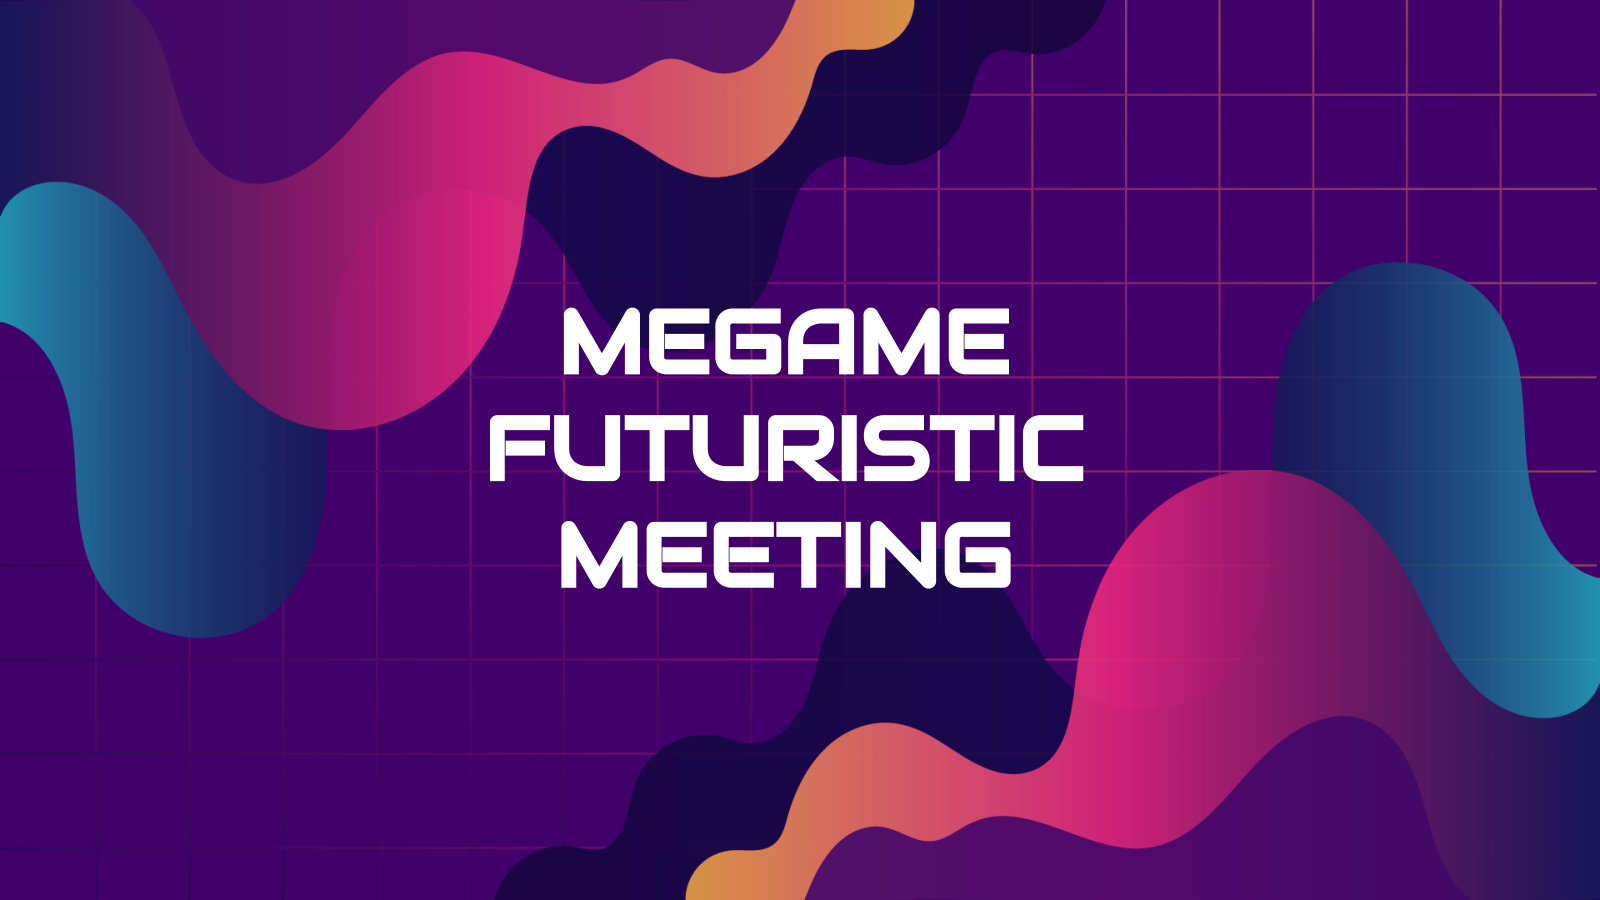 Megame Futuratic Meeting PowerPoint模板